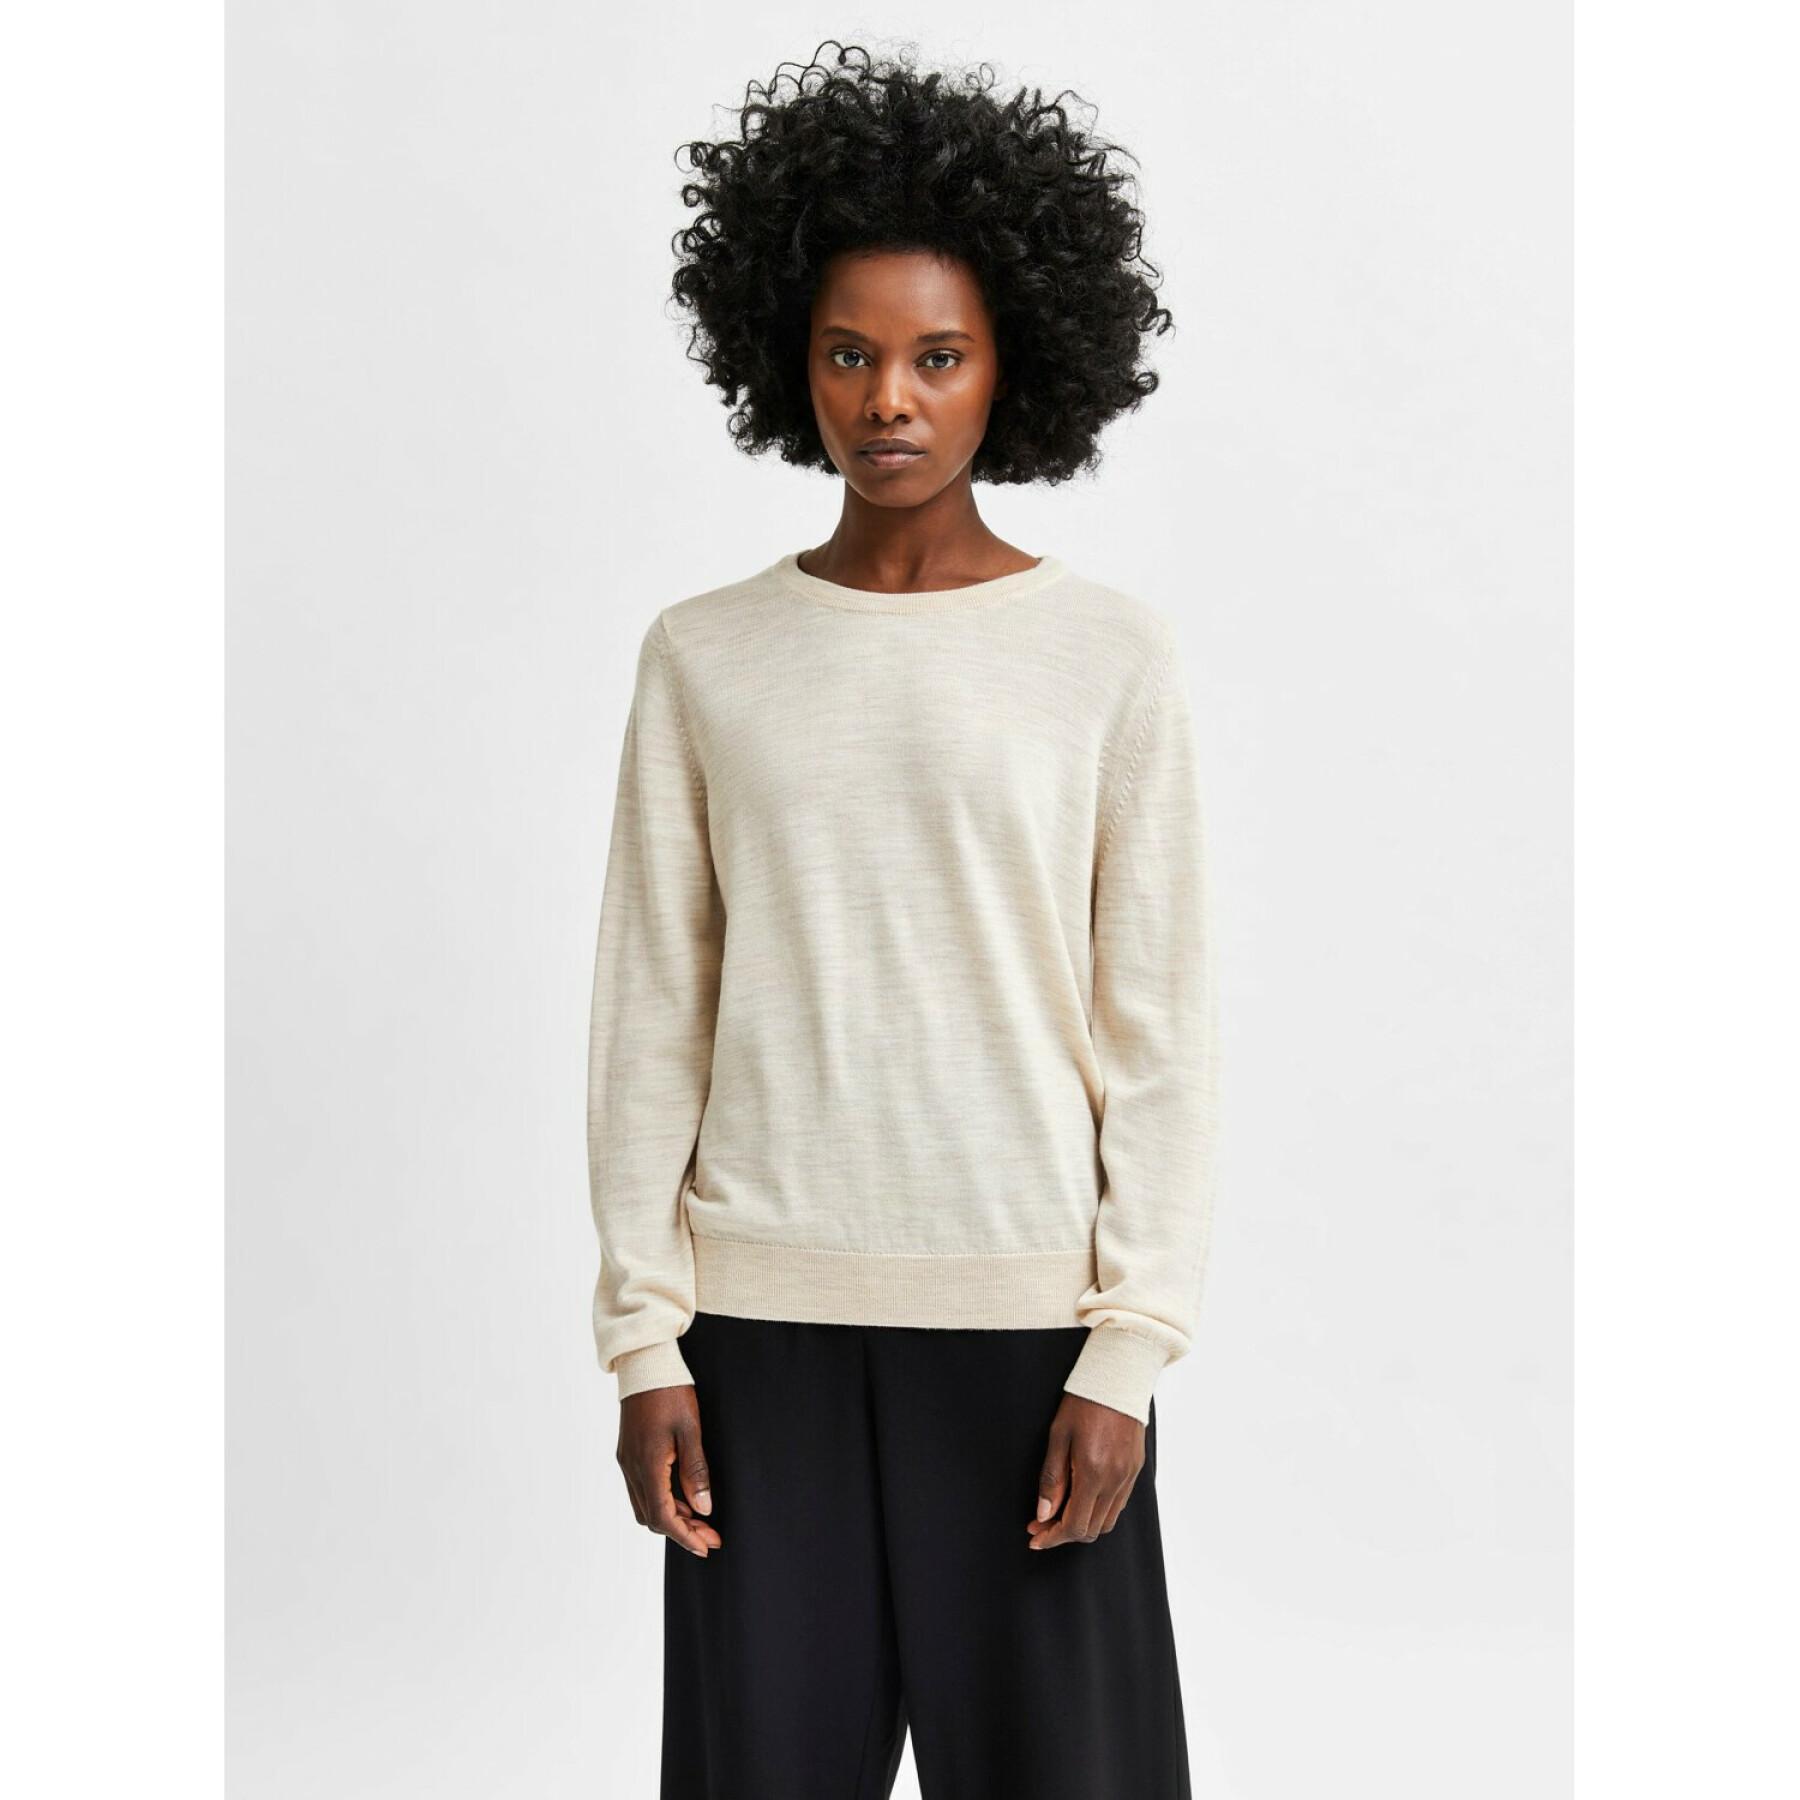 Women's round neck sweater Selected Magda